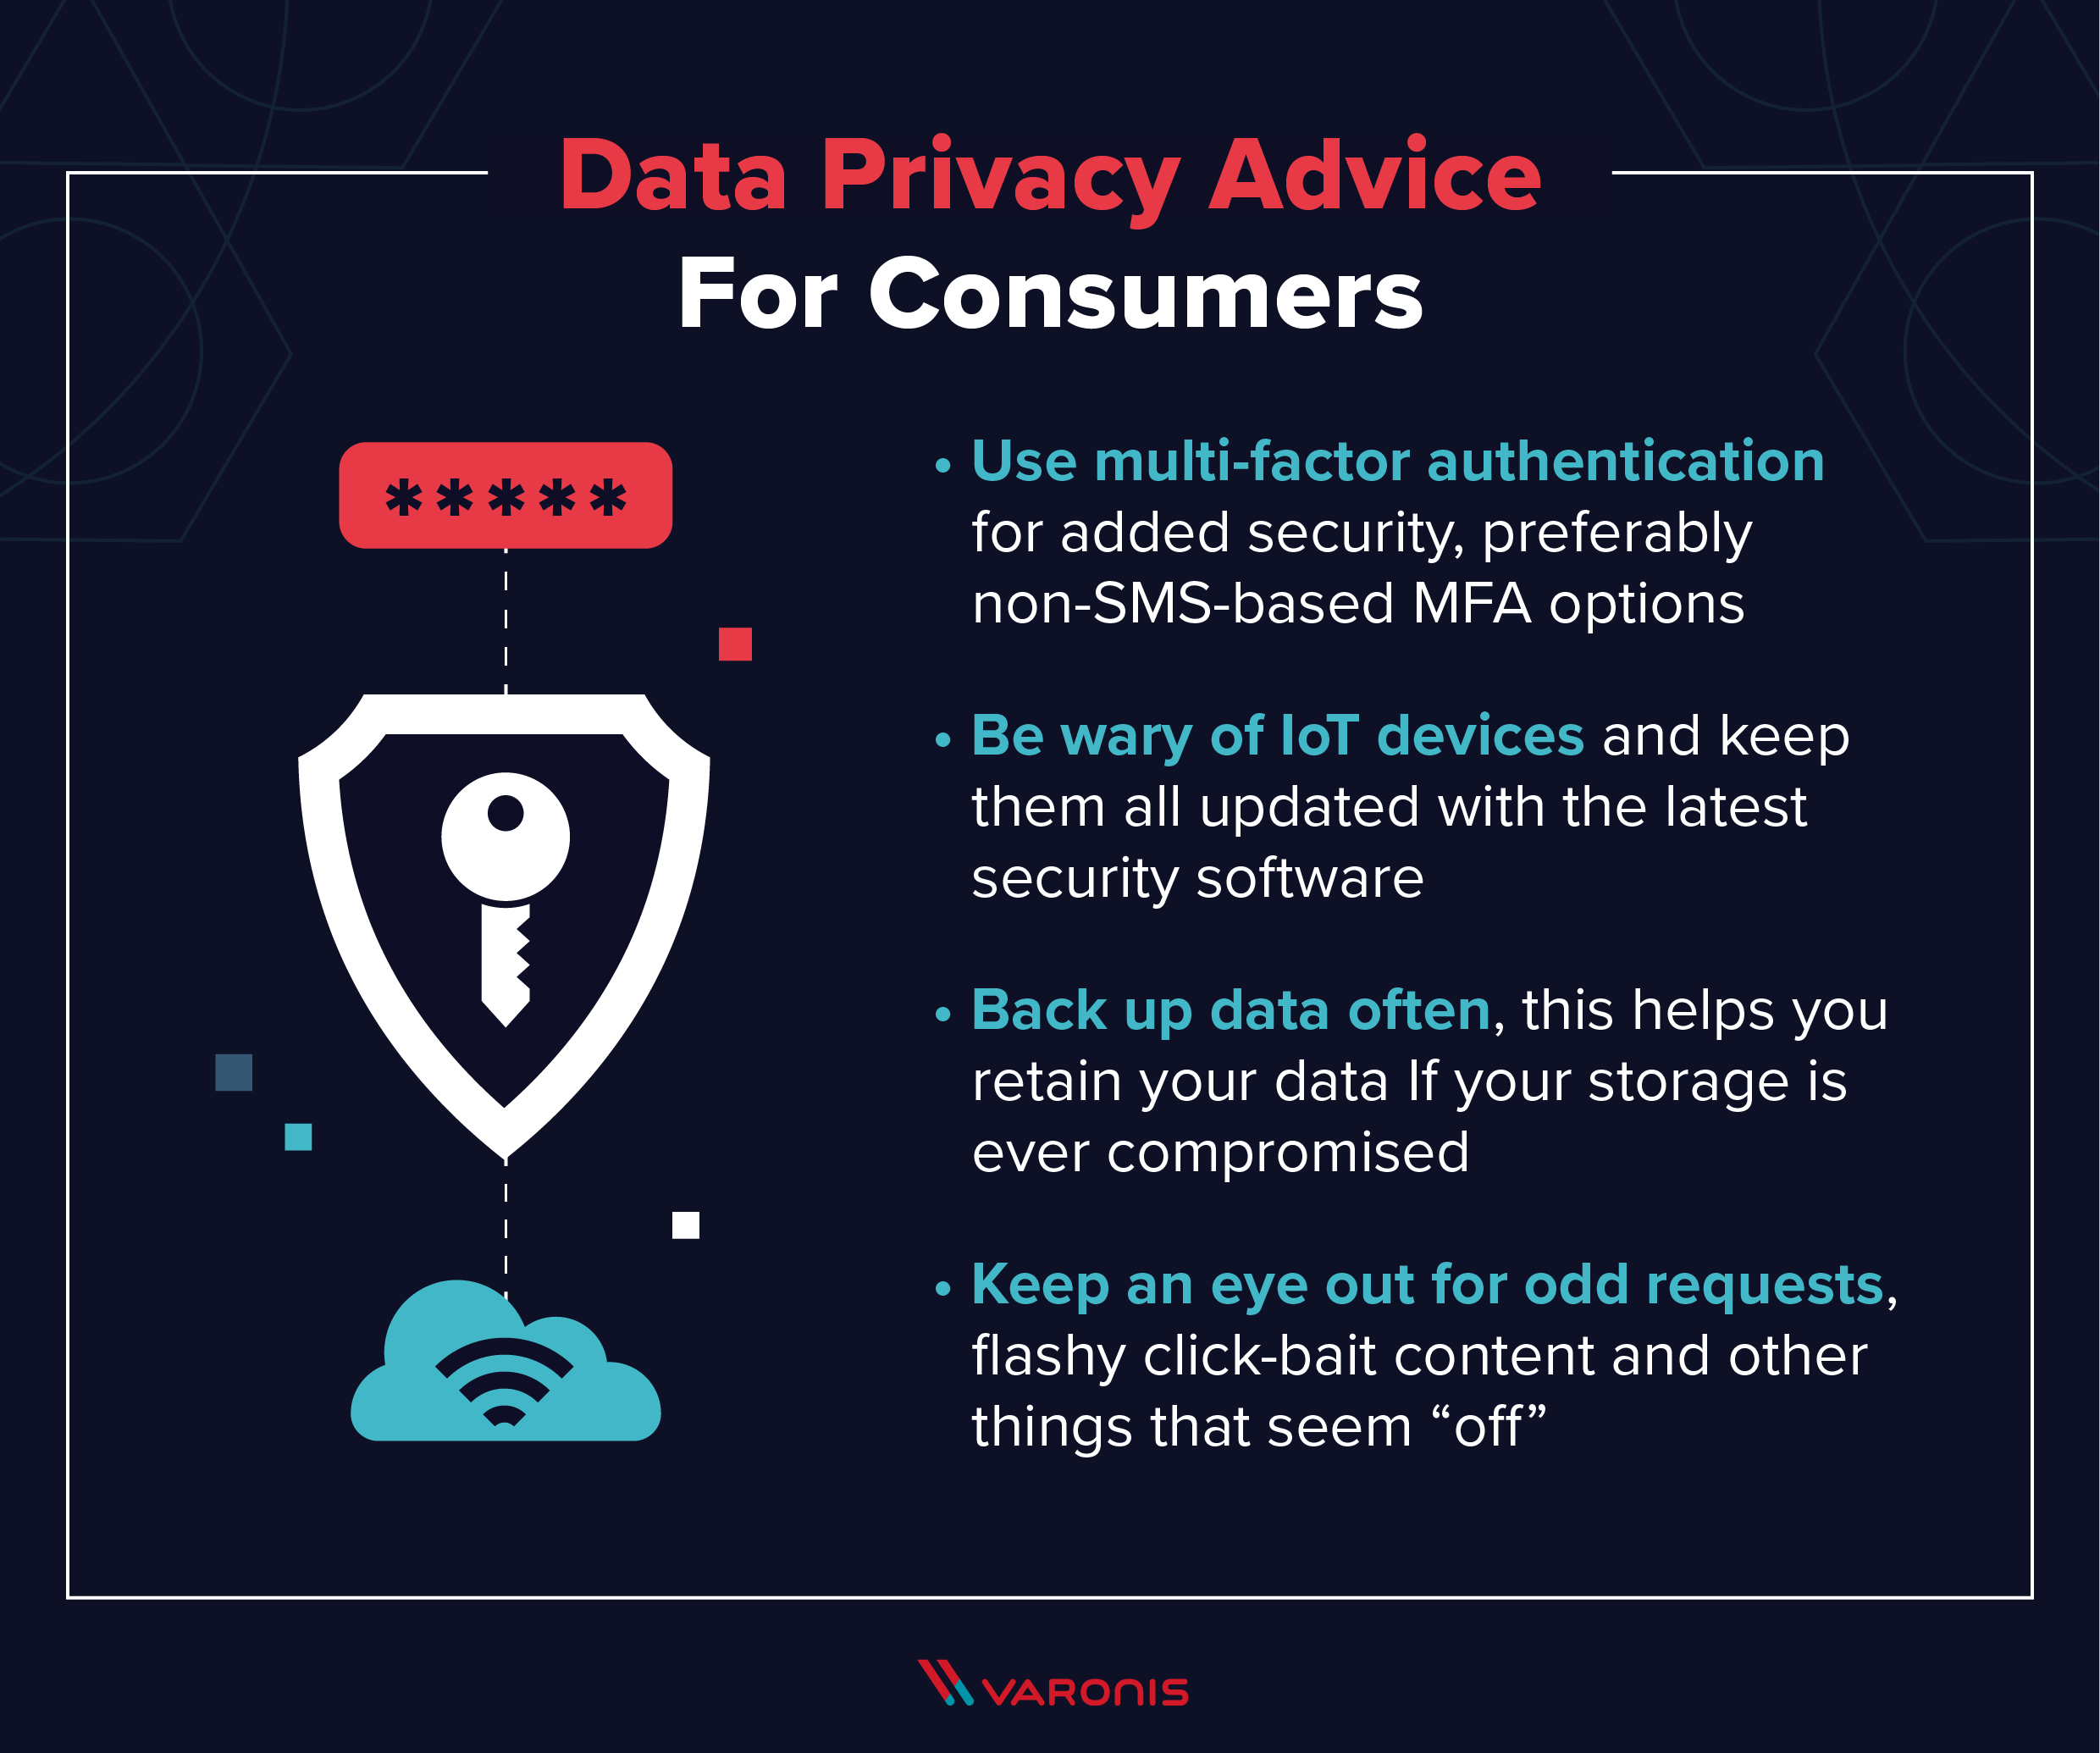 A bulleted list of data privacy advice for consumers